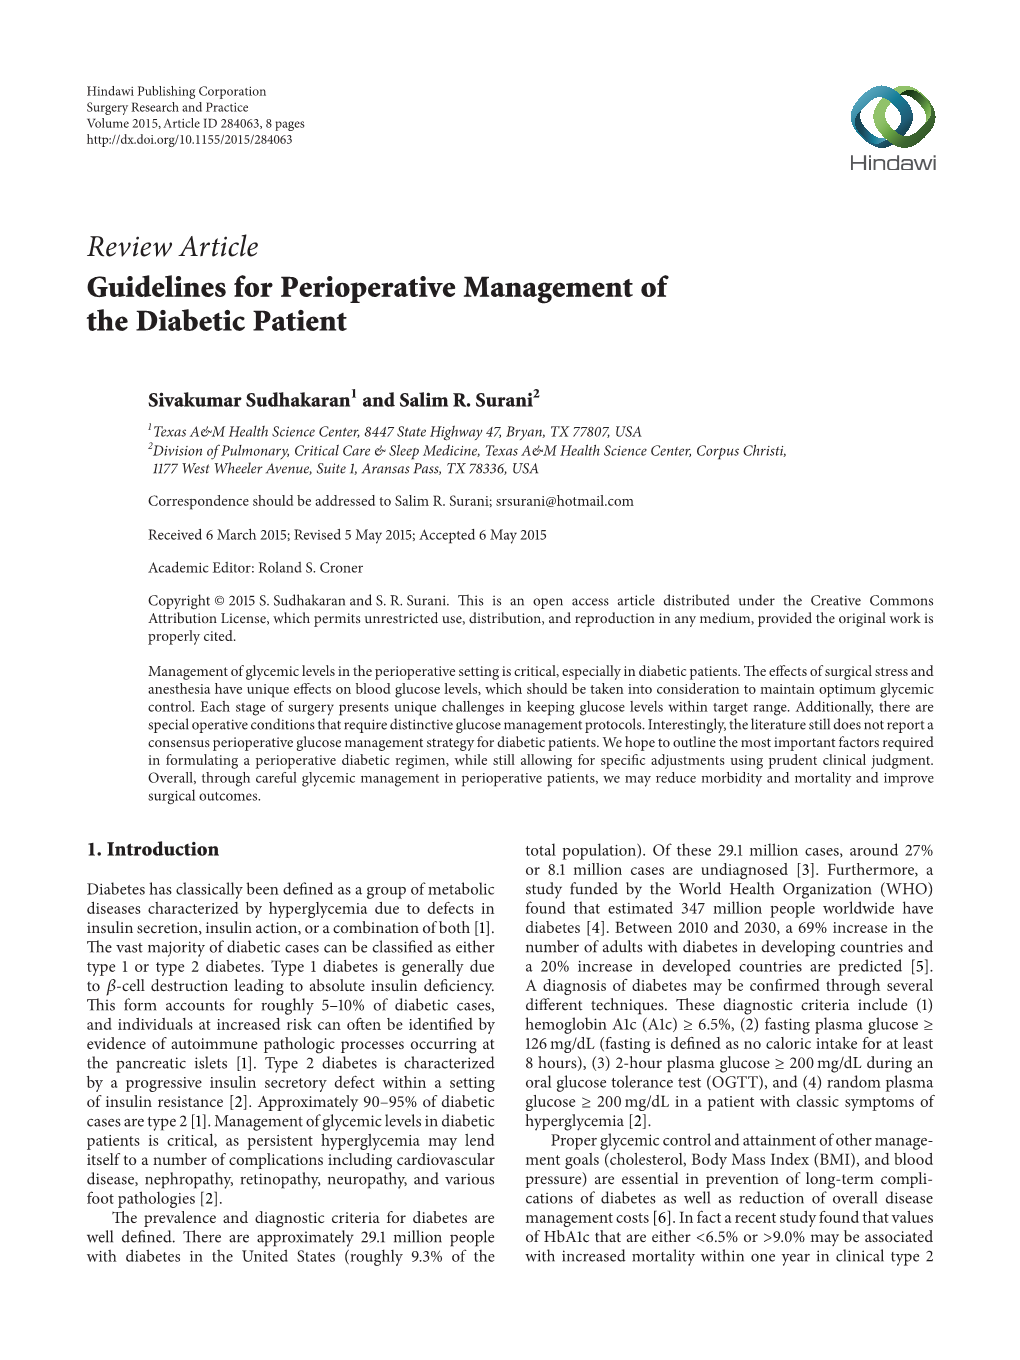 Review Article Guidelines for Perioperative Management of the Diabetic Patient